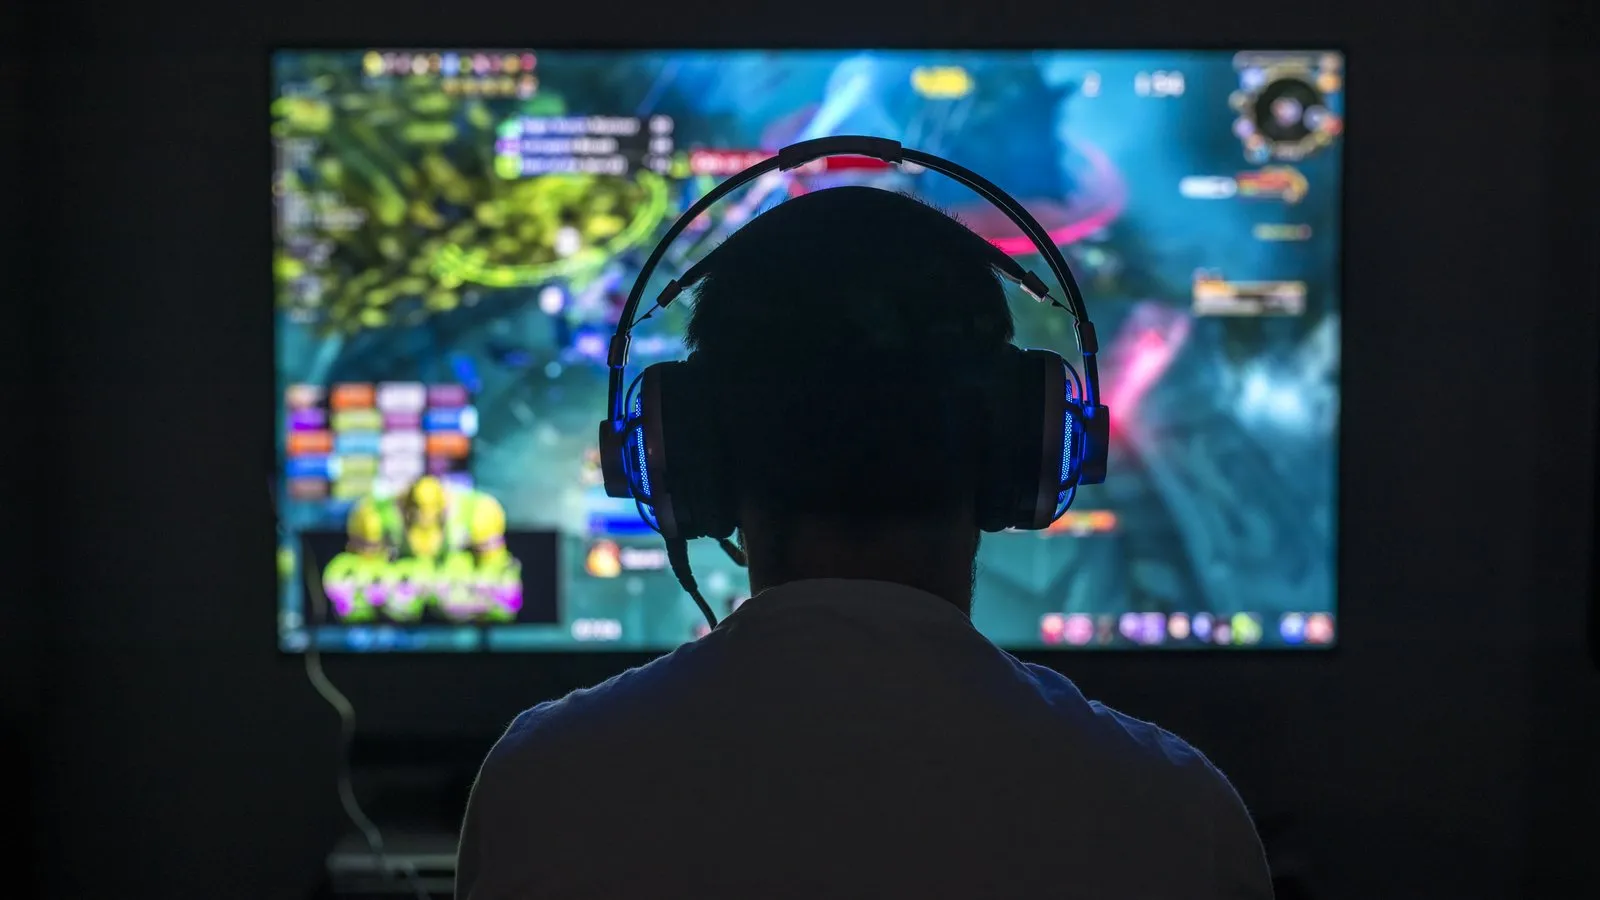 Crypto and gaming are becoming increasingly intertwined. Image: Shutterstock